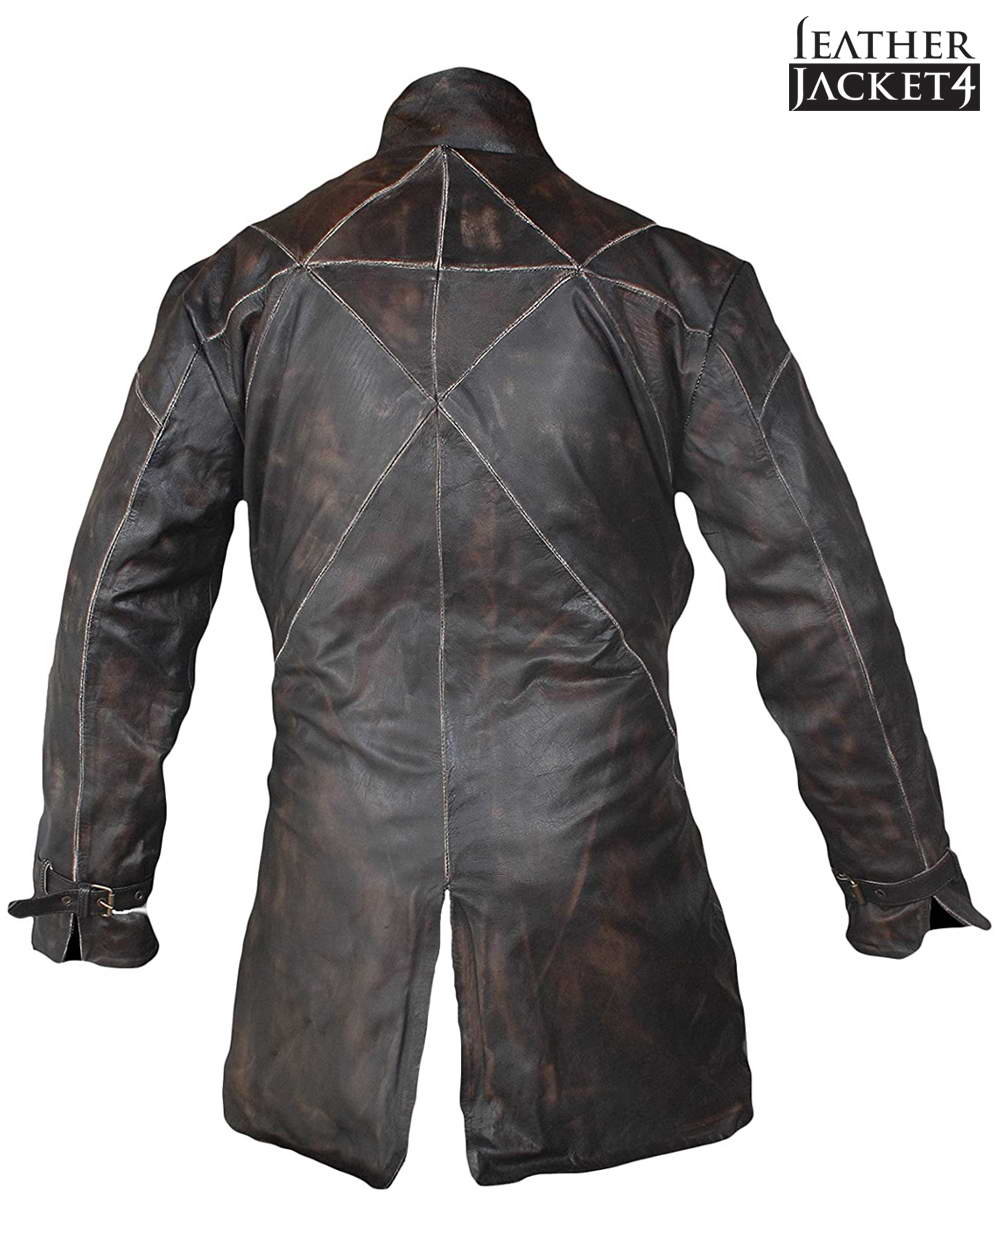 Aidenpearce Watch Dogs Aiden Pearce Real Leather Jacket Coat